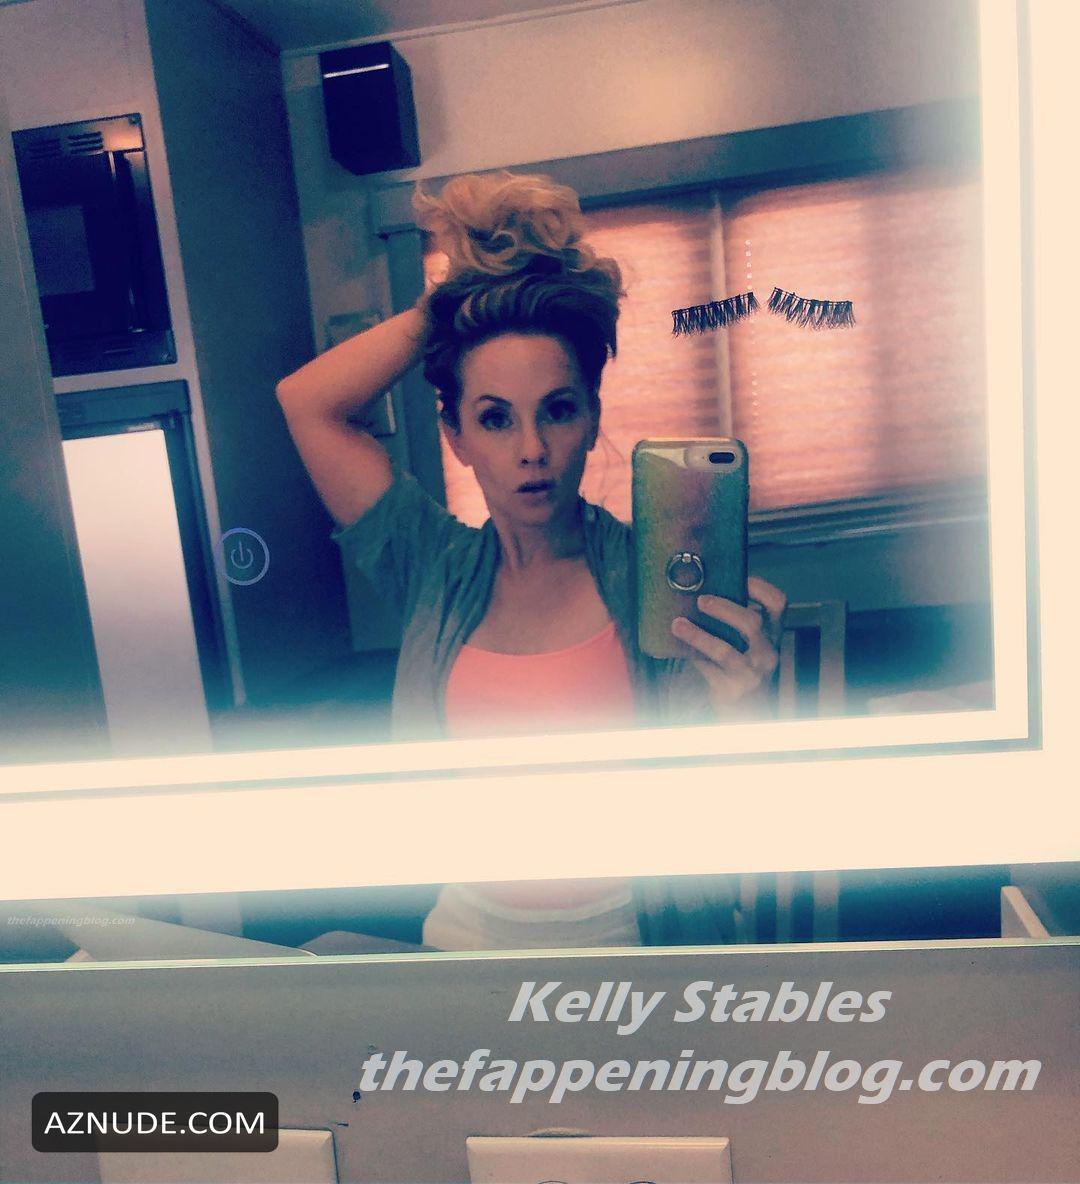 Kelly stables nude pictures